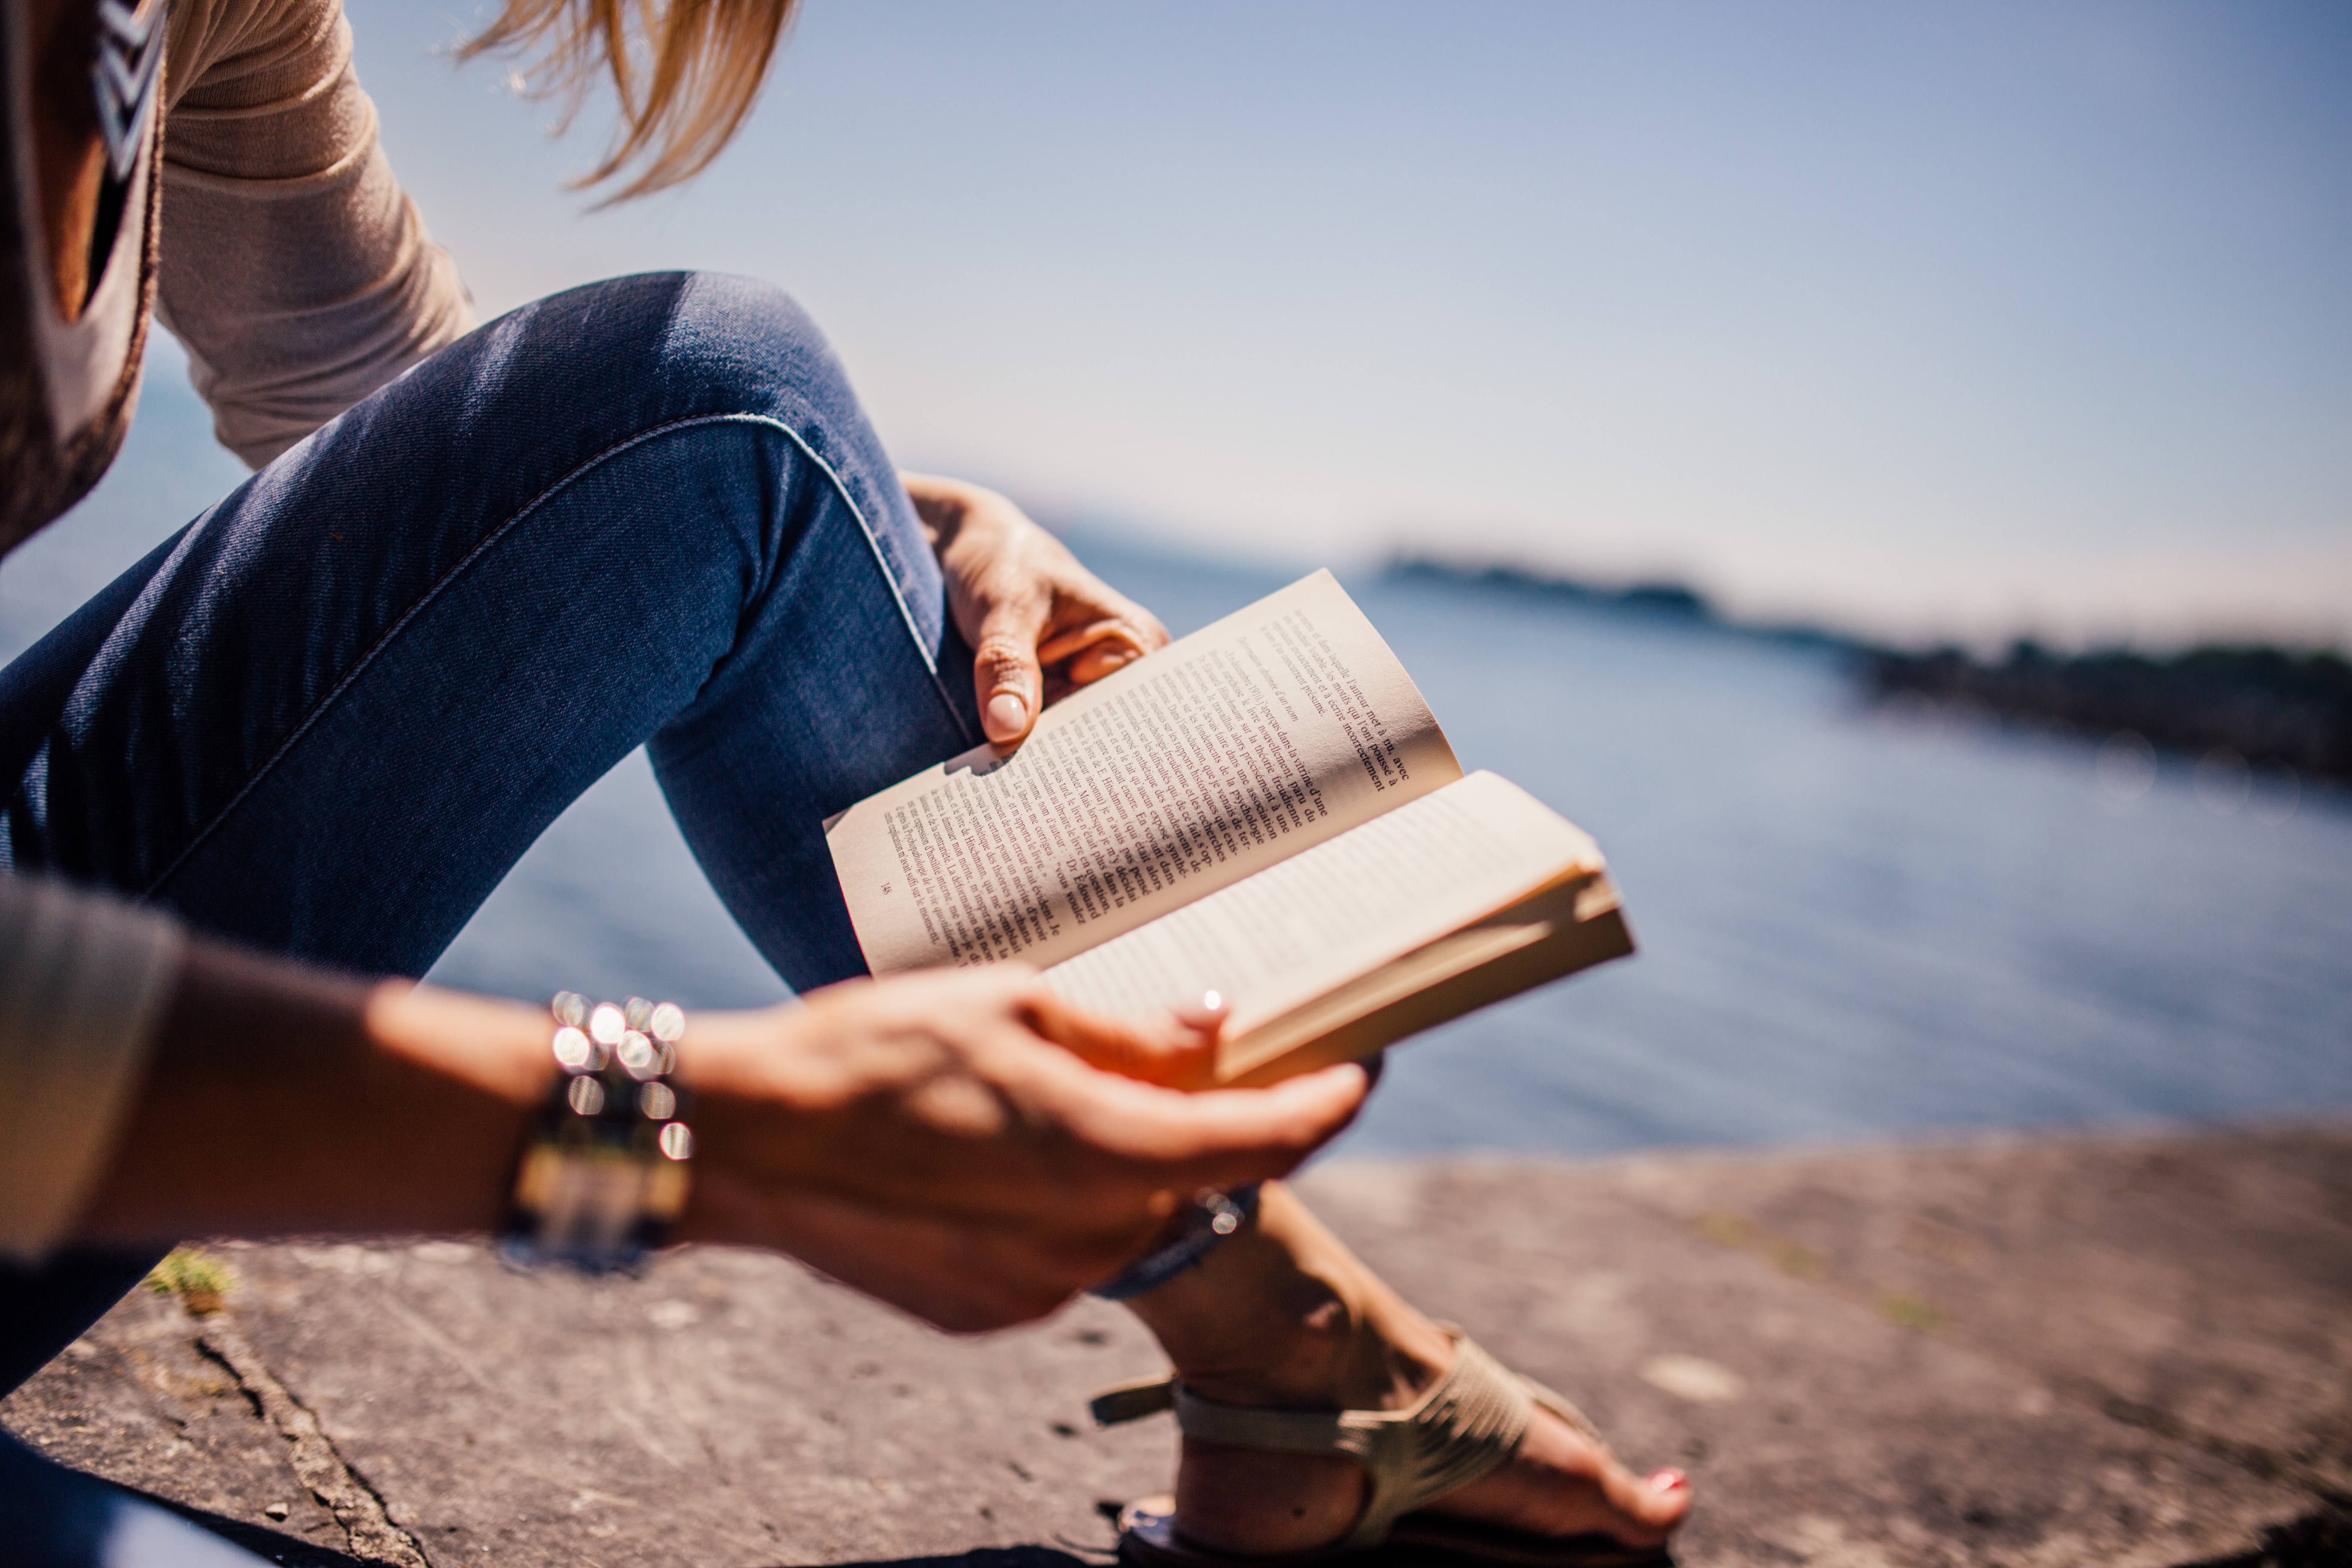 Reading Novels Can Change Our Brains, Study Says